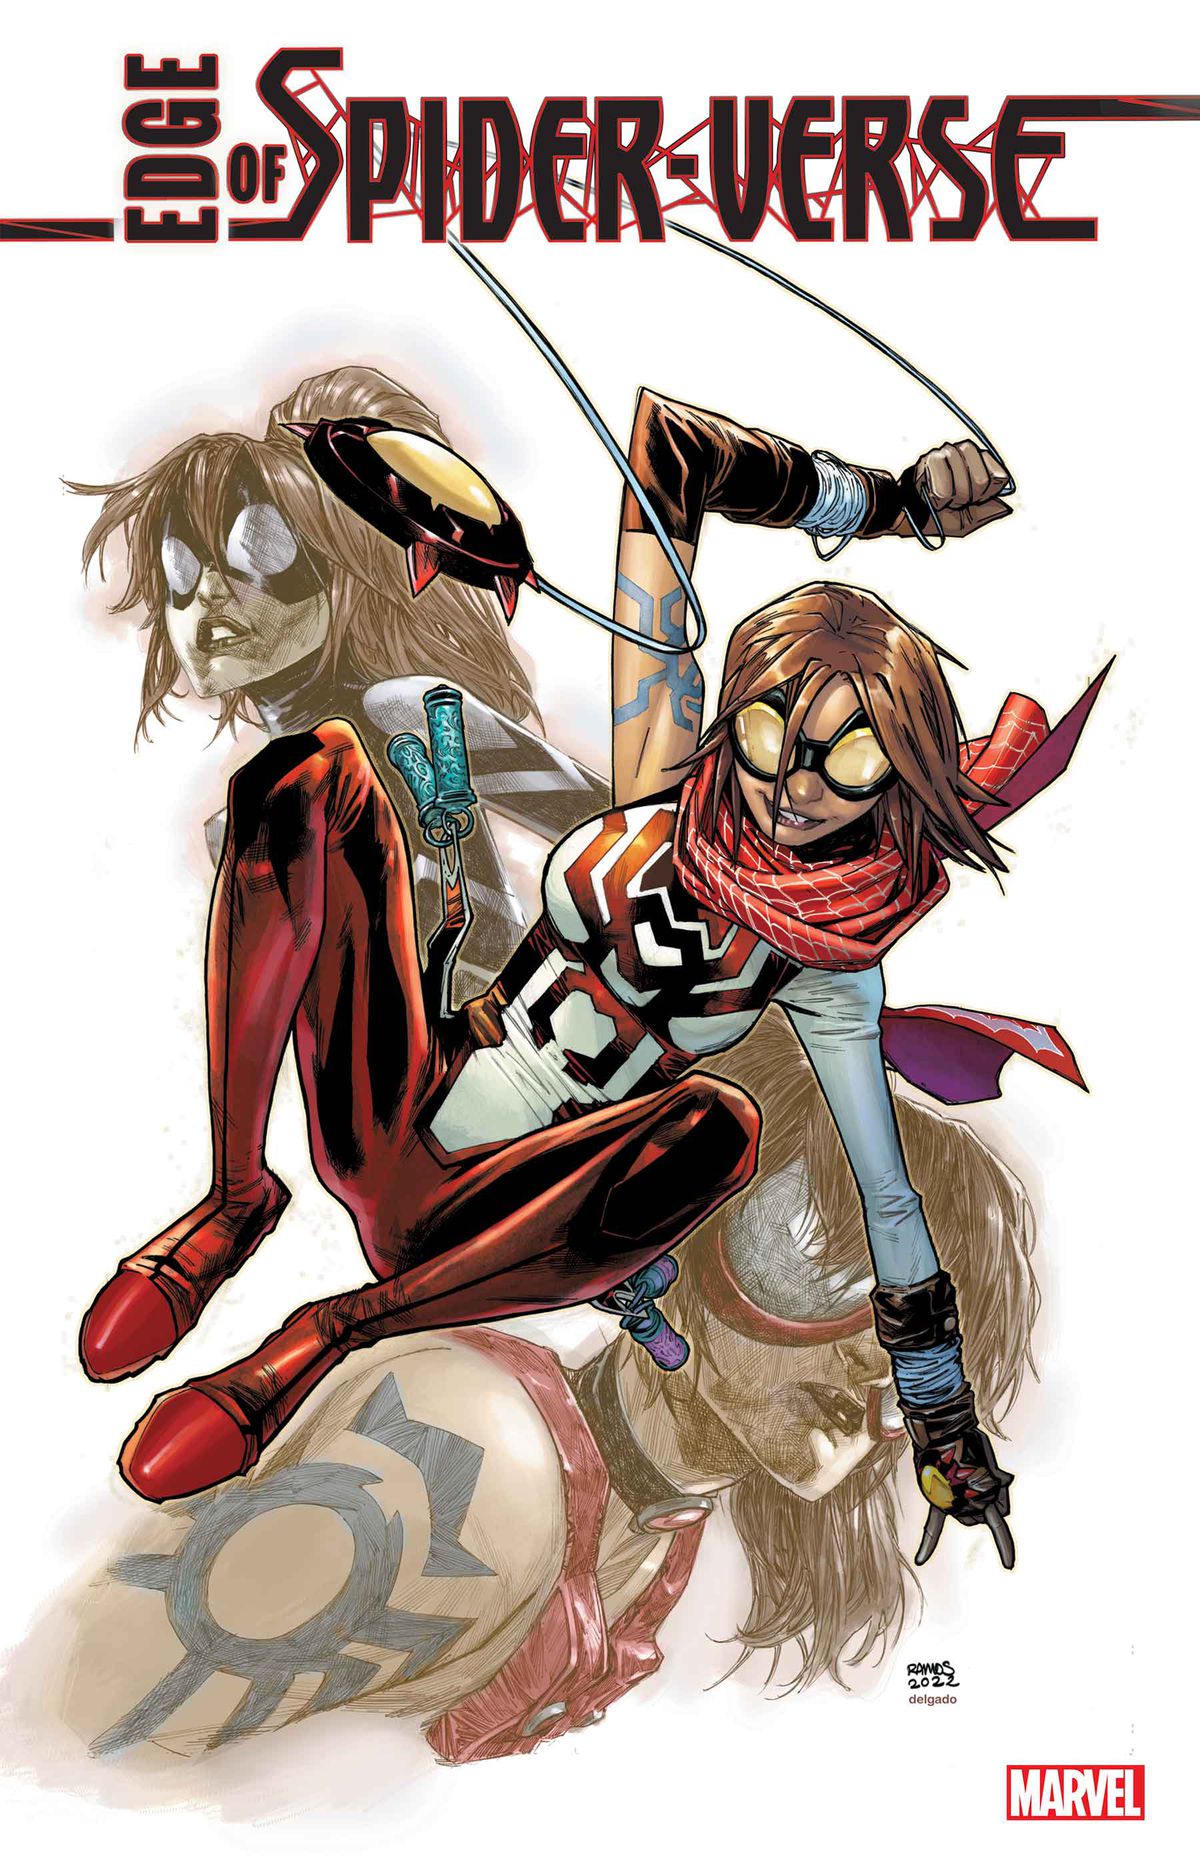 Araña swings through the air on a variant cover for Edge of Spider-Verse #1 (2022).